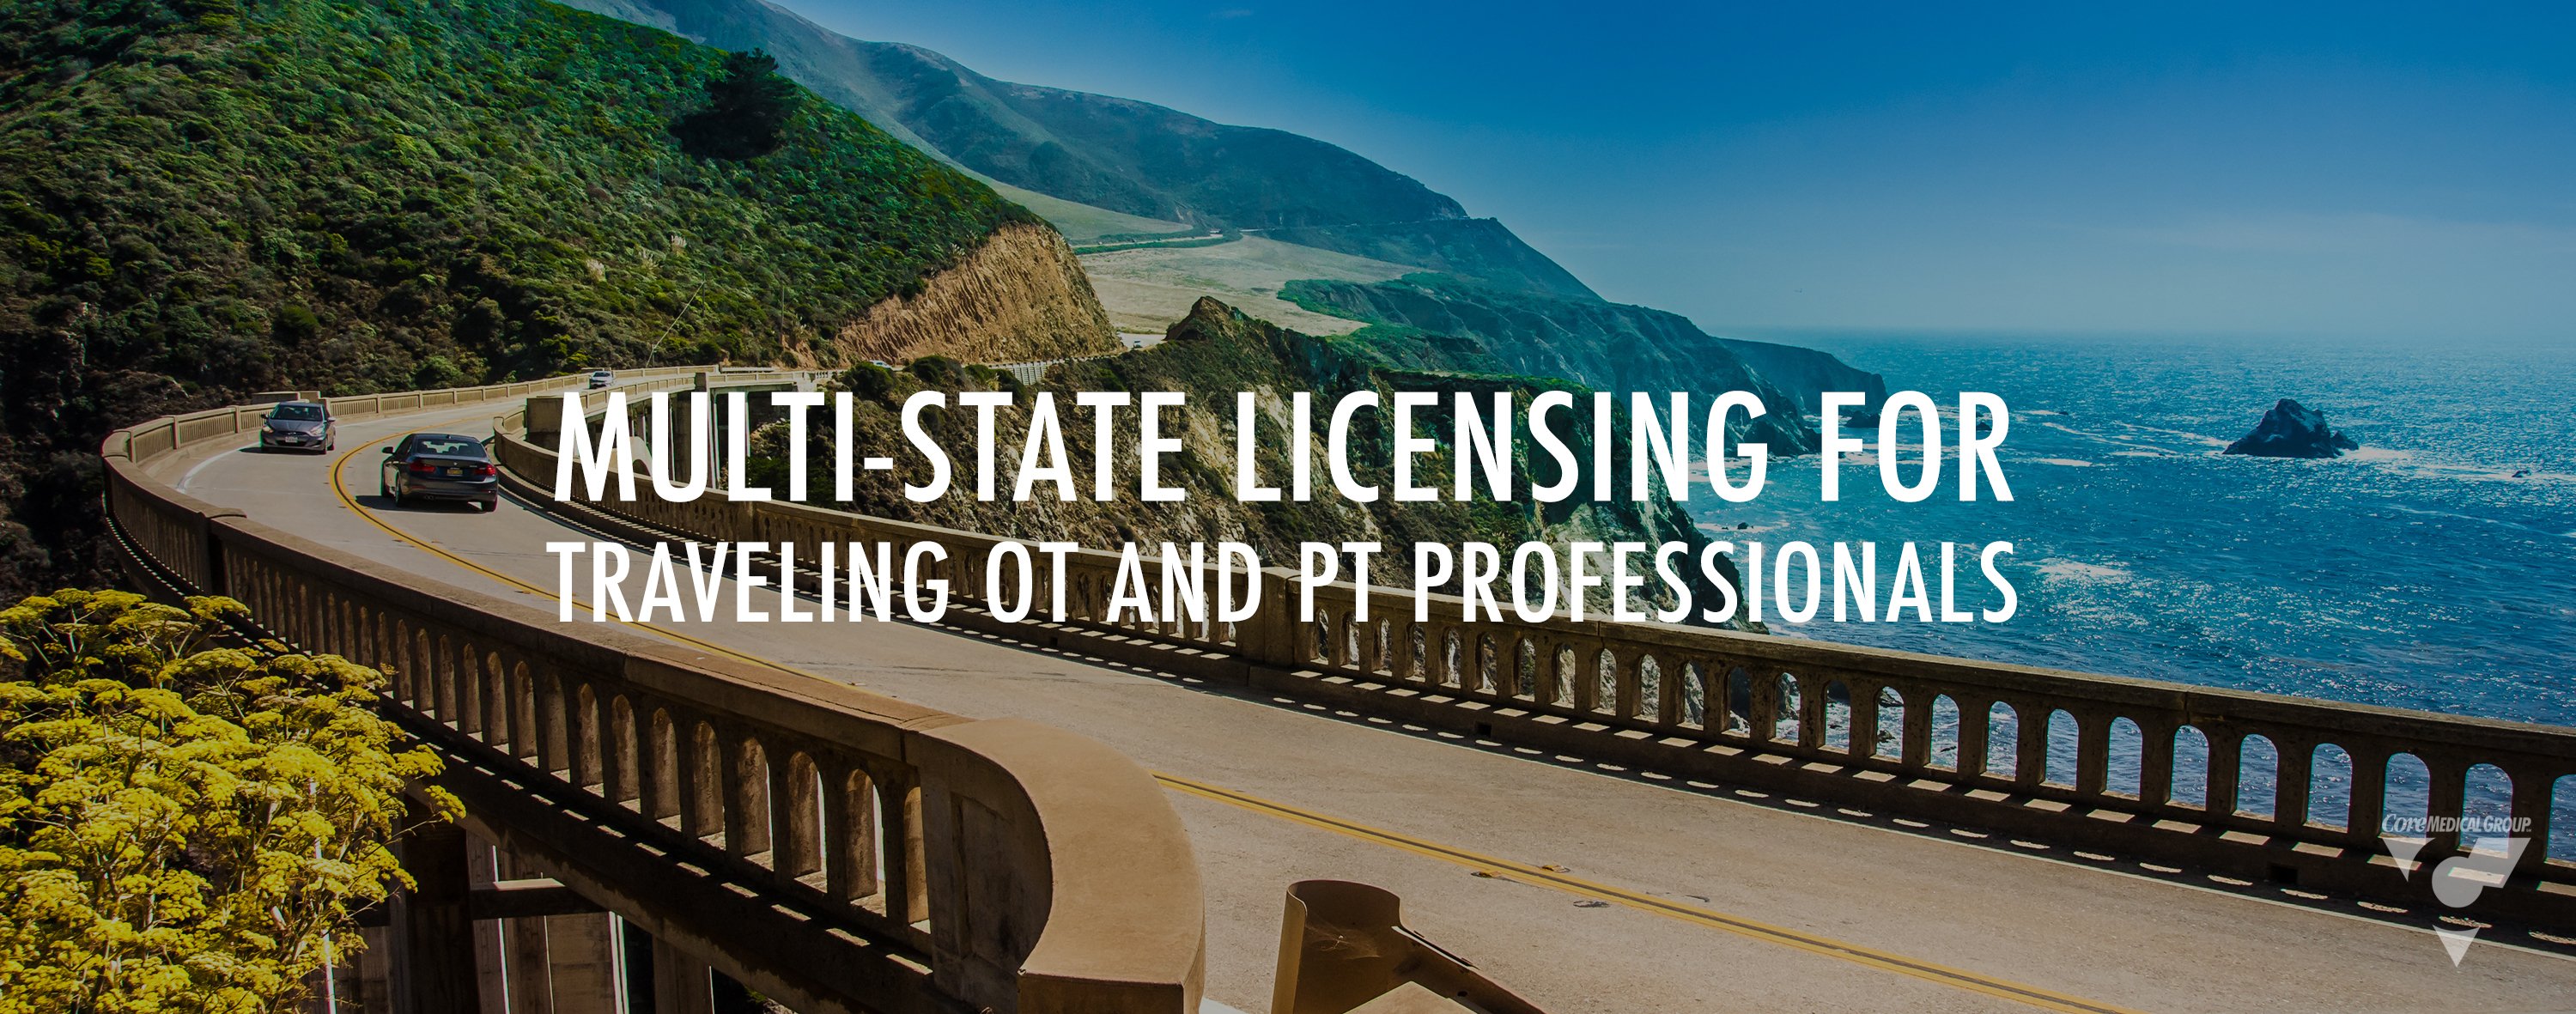 Core Medical Group CMG Multi-State Licensing for Traveling OT and PT Professionals